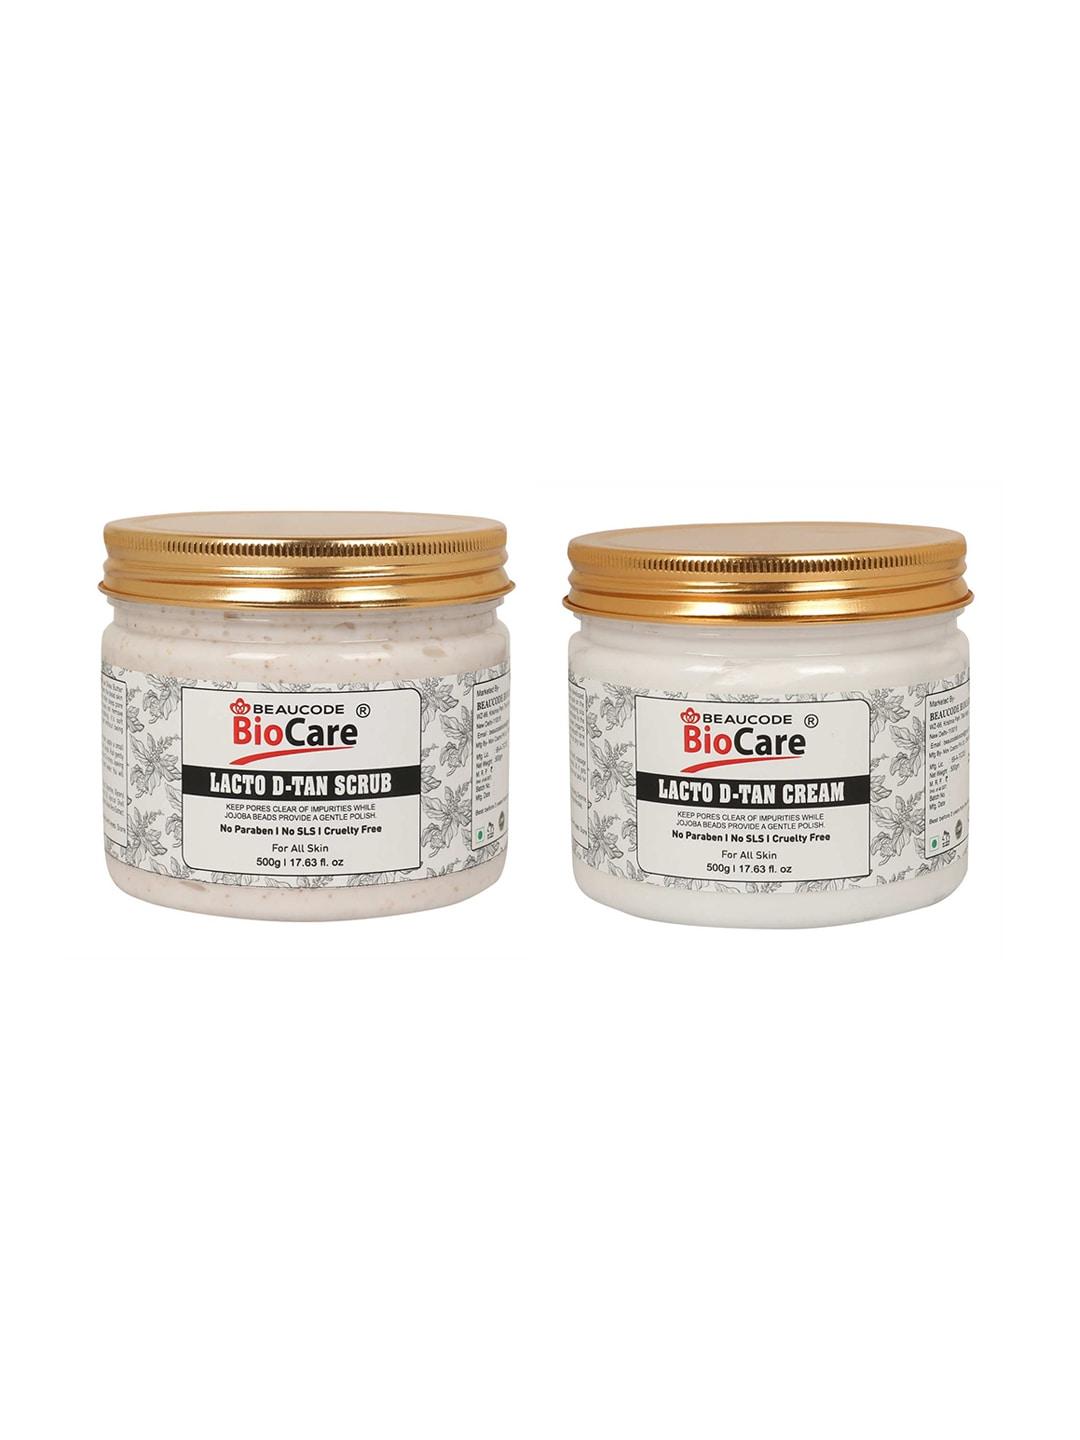 beaucode biocare set of 2  lacto d-tan face and body cream and scrub 1kg